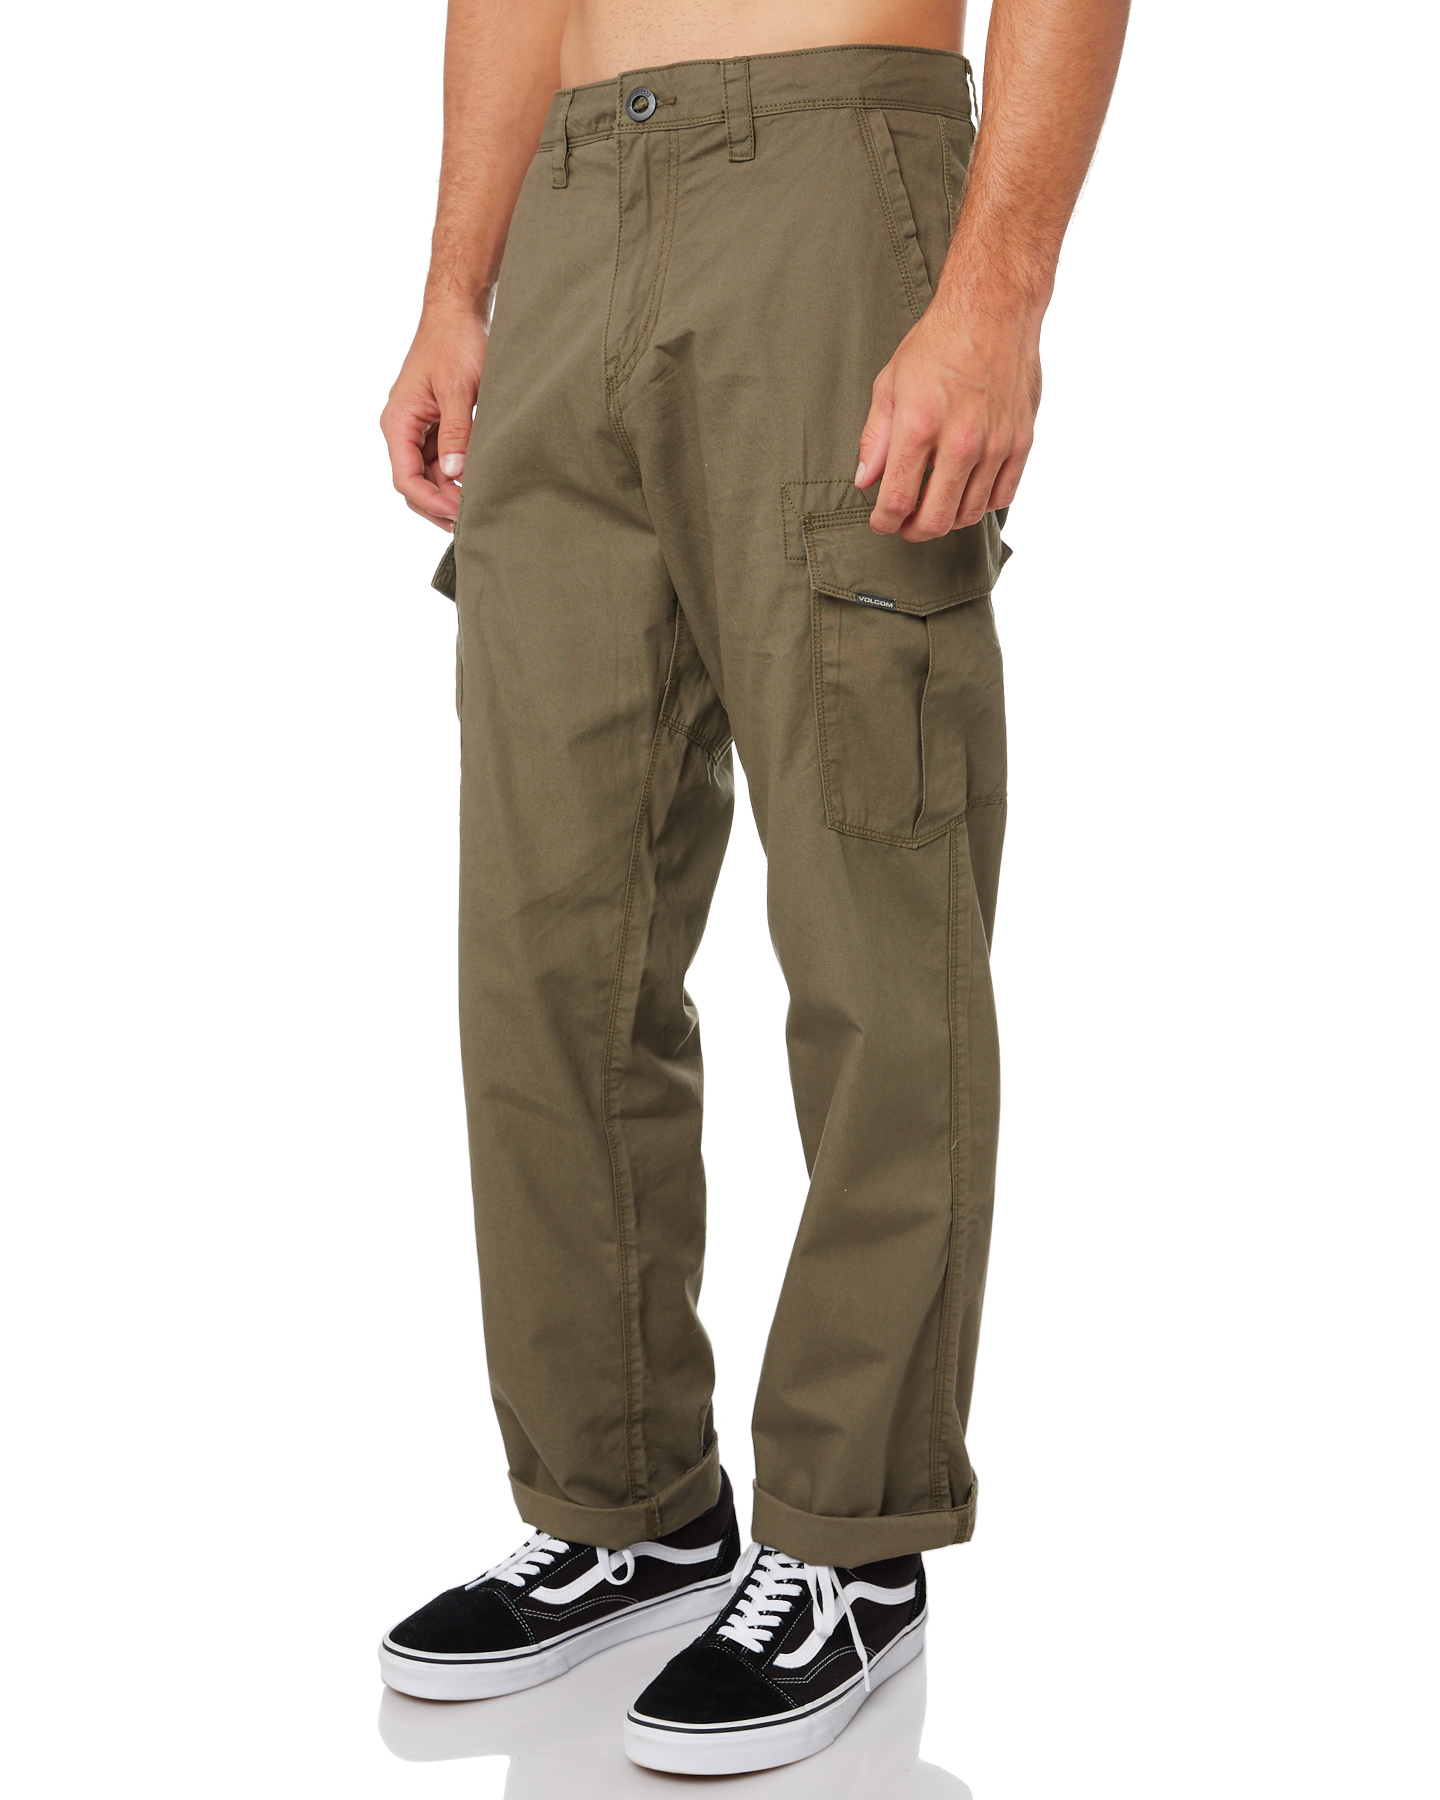 Volcom Miter Ii Mens Cargo Pant - Army Green Combo | SurfStitch